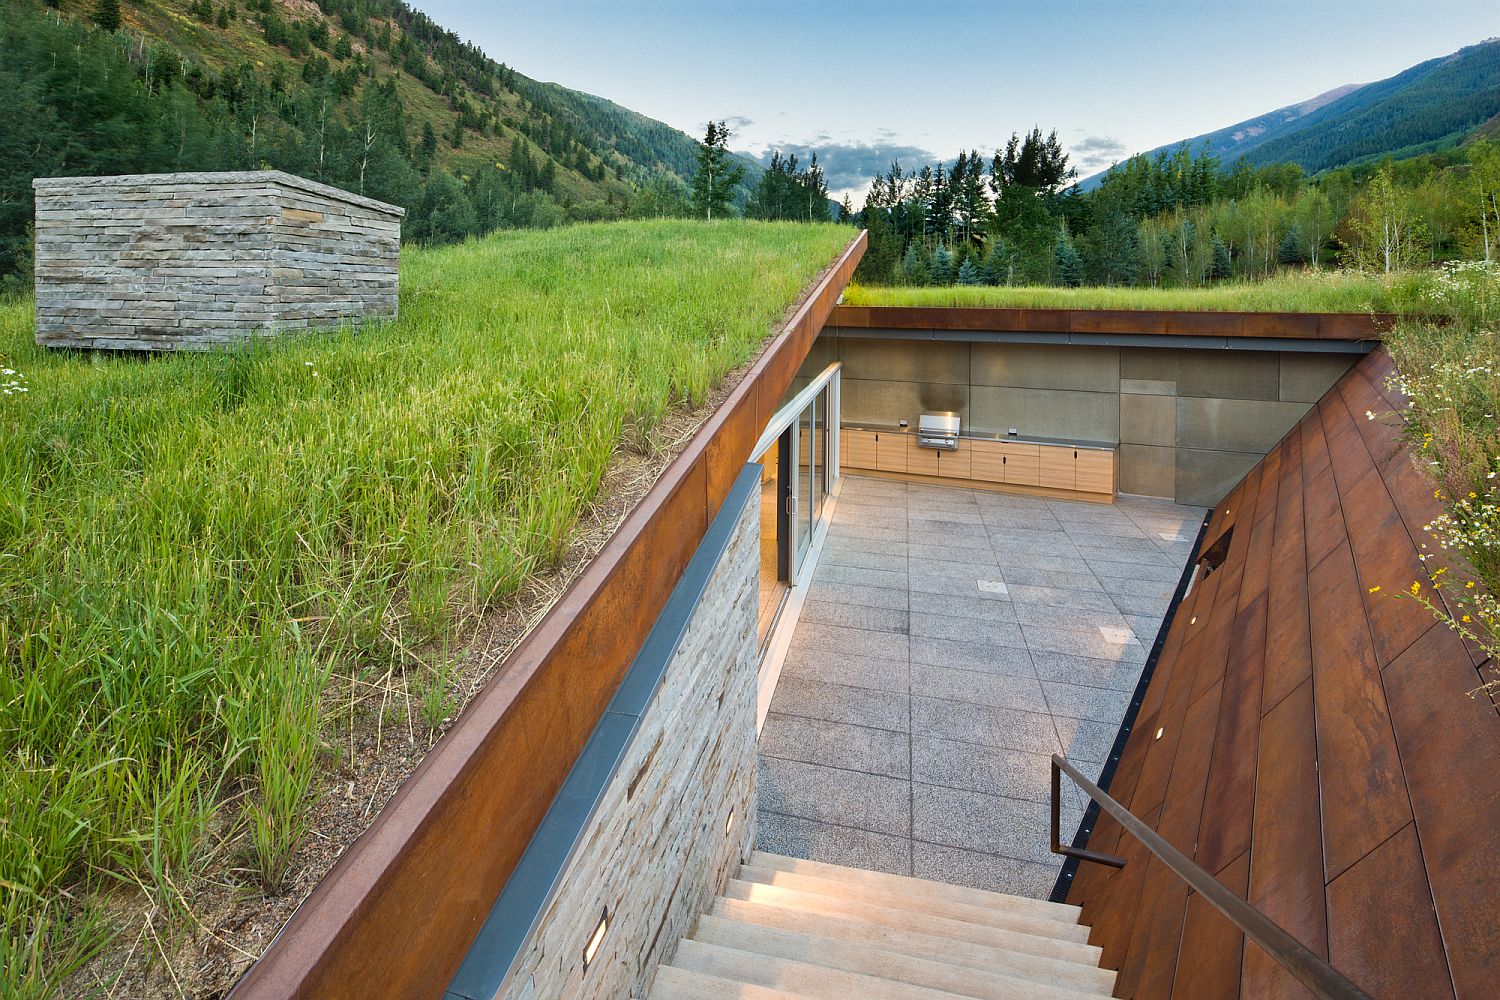 Private sunken outdoor space surrounded by corten clad walls